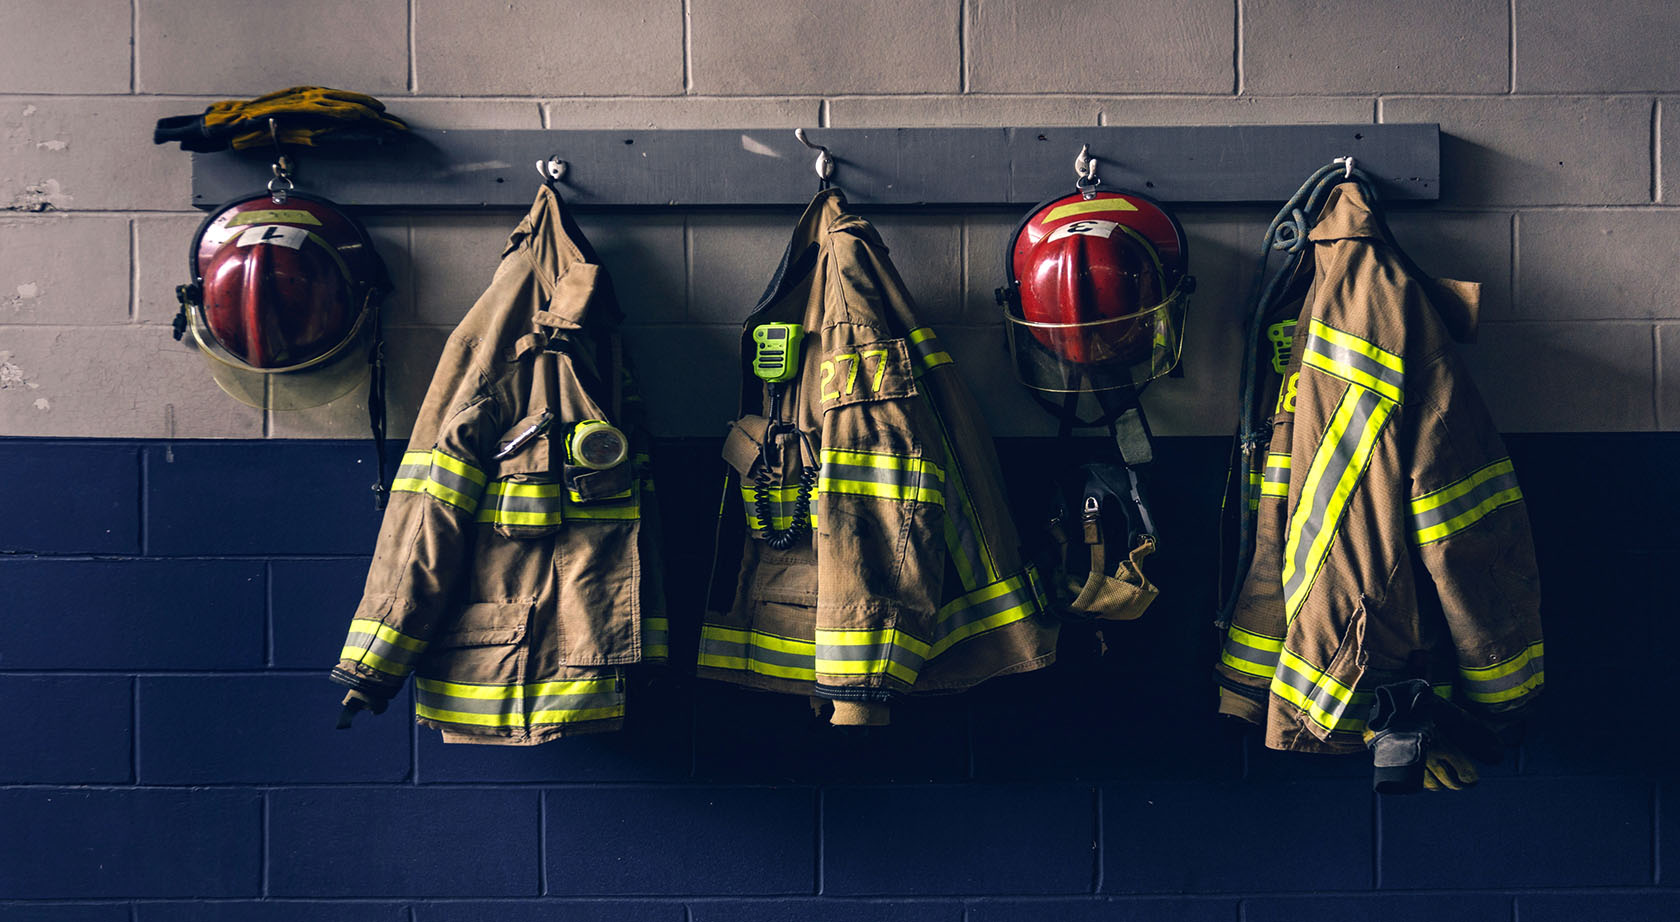 Firefighter jackets and helmets hanging on a wall